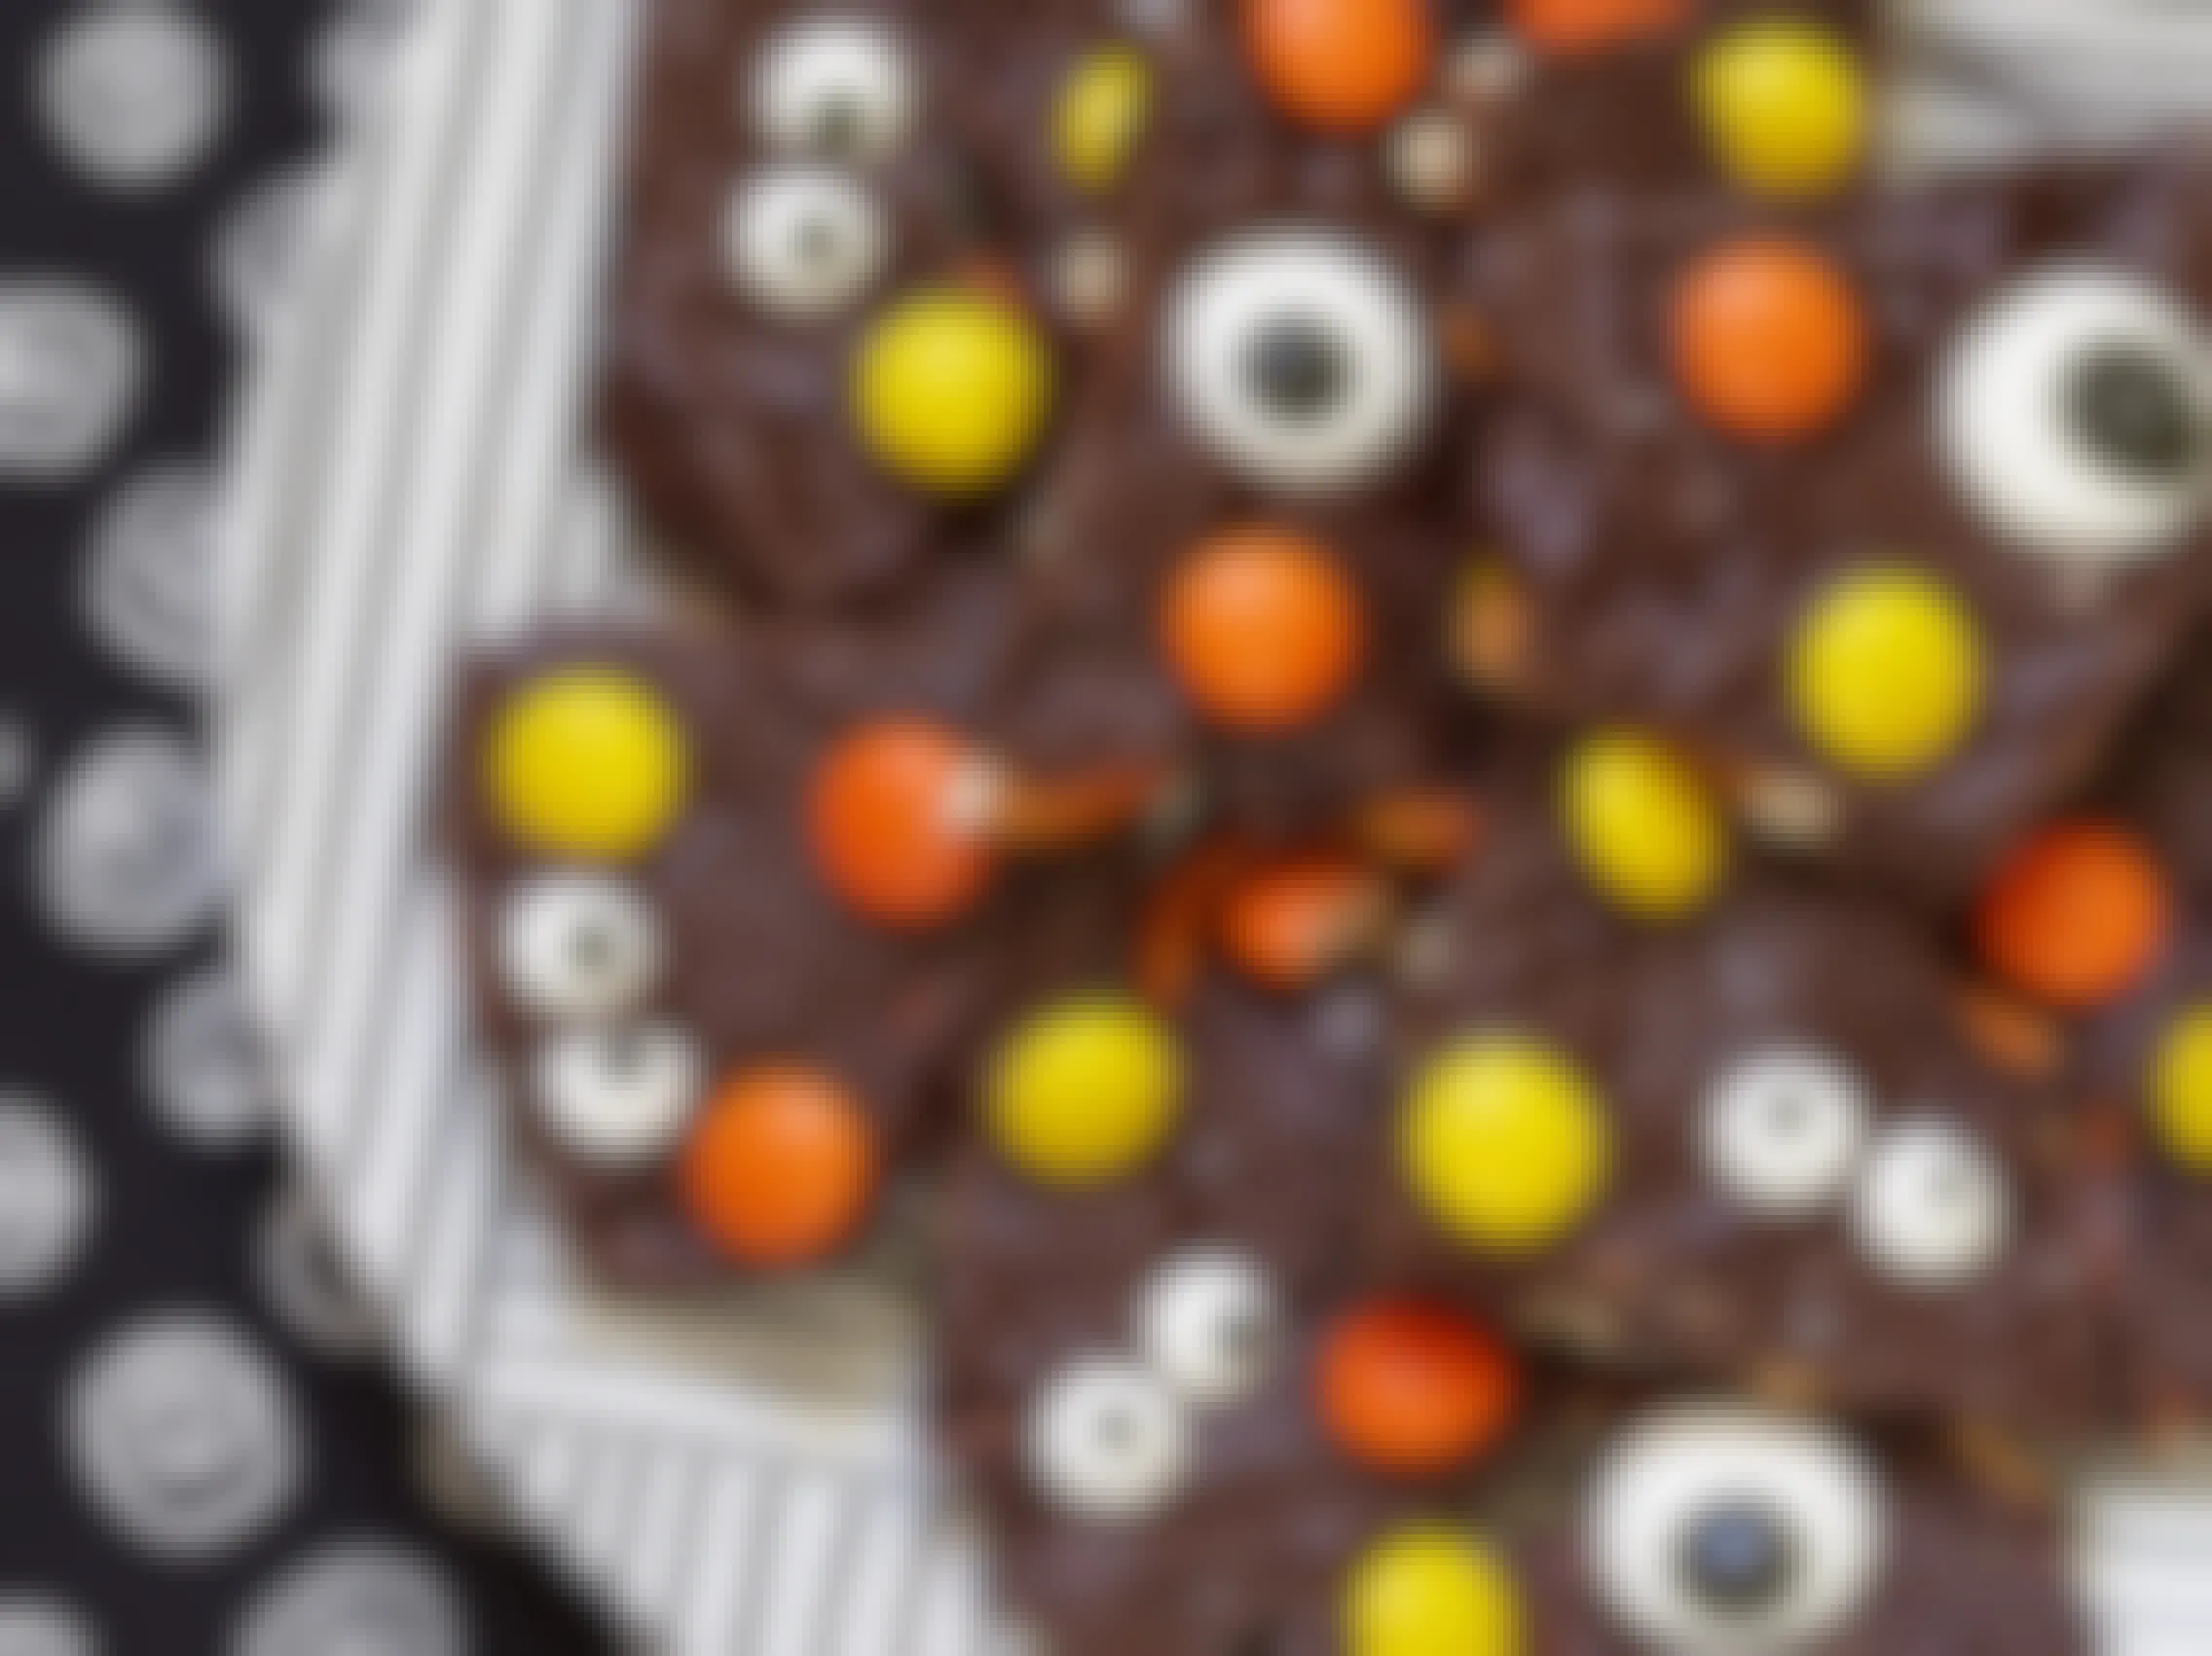 A plate of chocolate bark made with Reese's pieces.